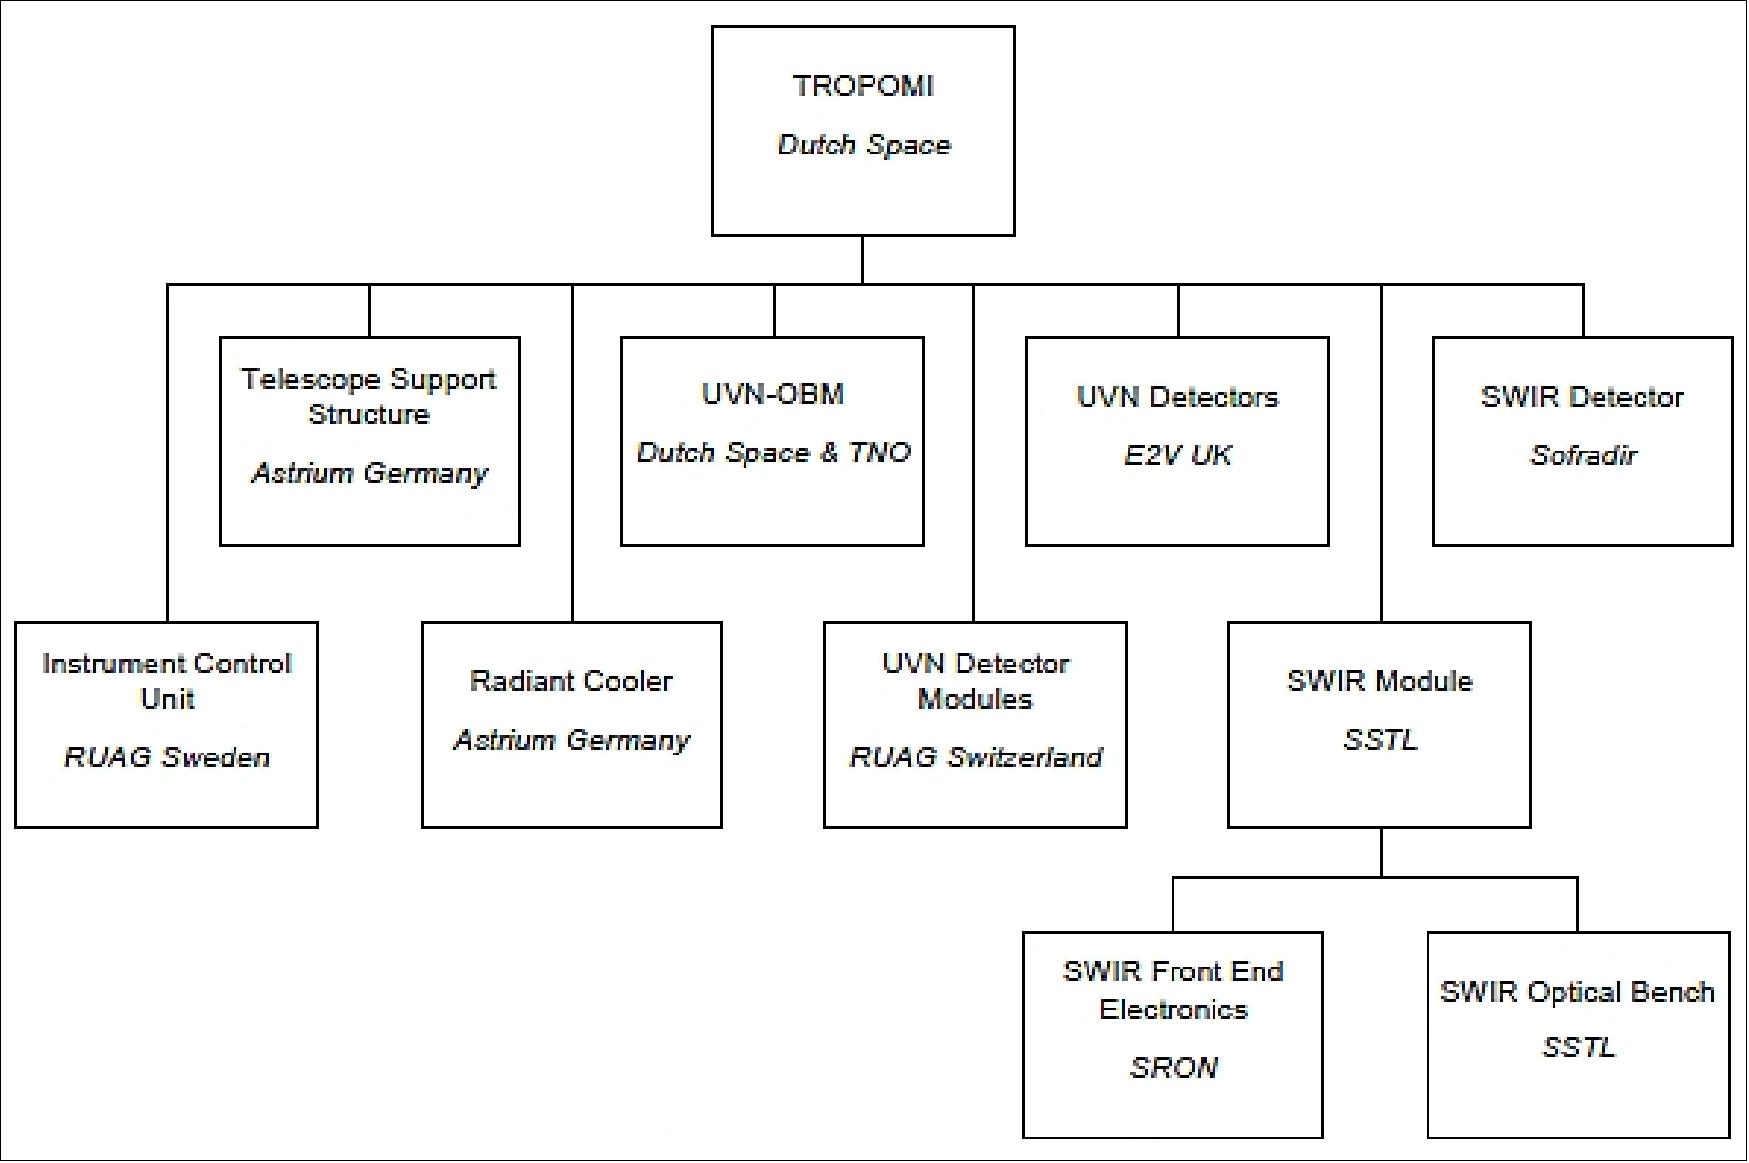 Figure 88: TROPOMI system breakdown and unit suppliers (image credit: Dutch Space)